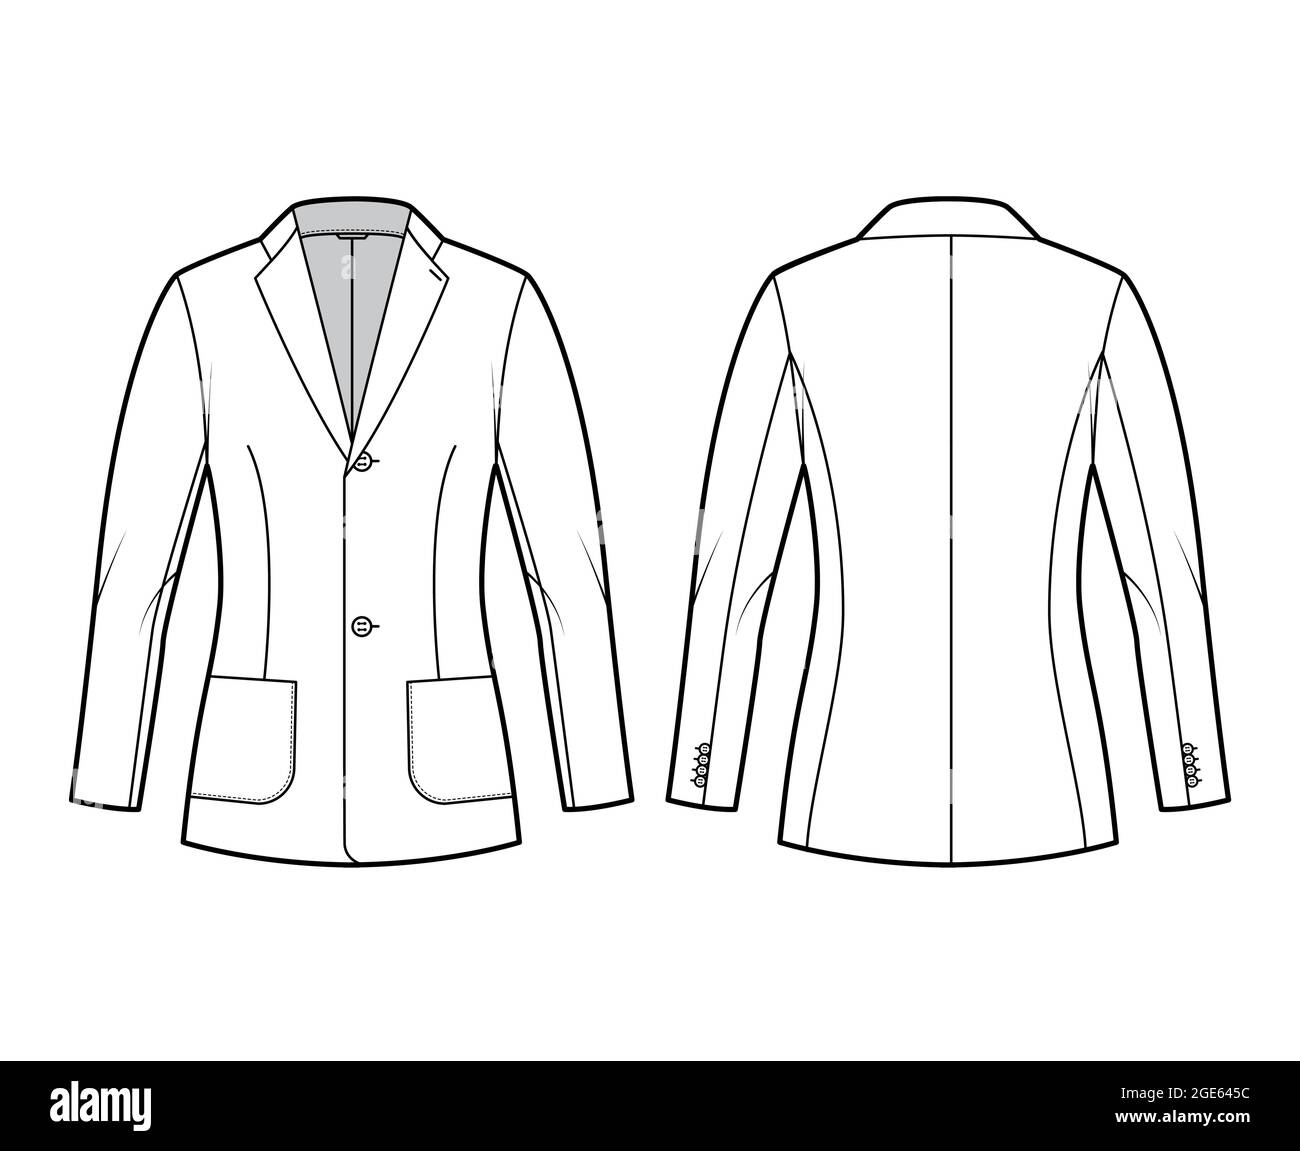 Blazer fitted jacket suit technical fashion illustration with single ...